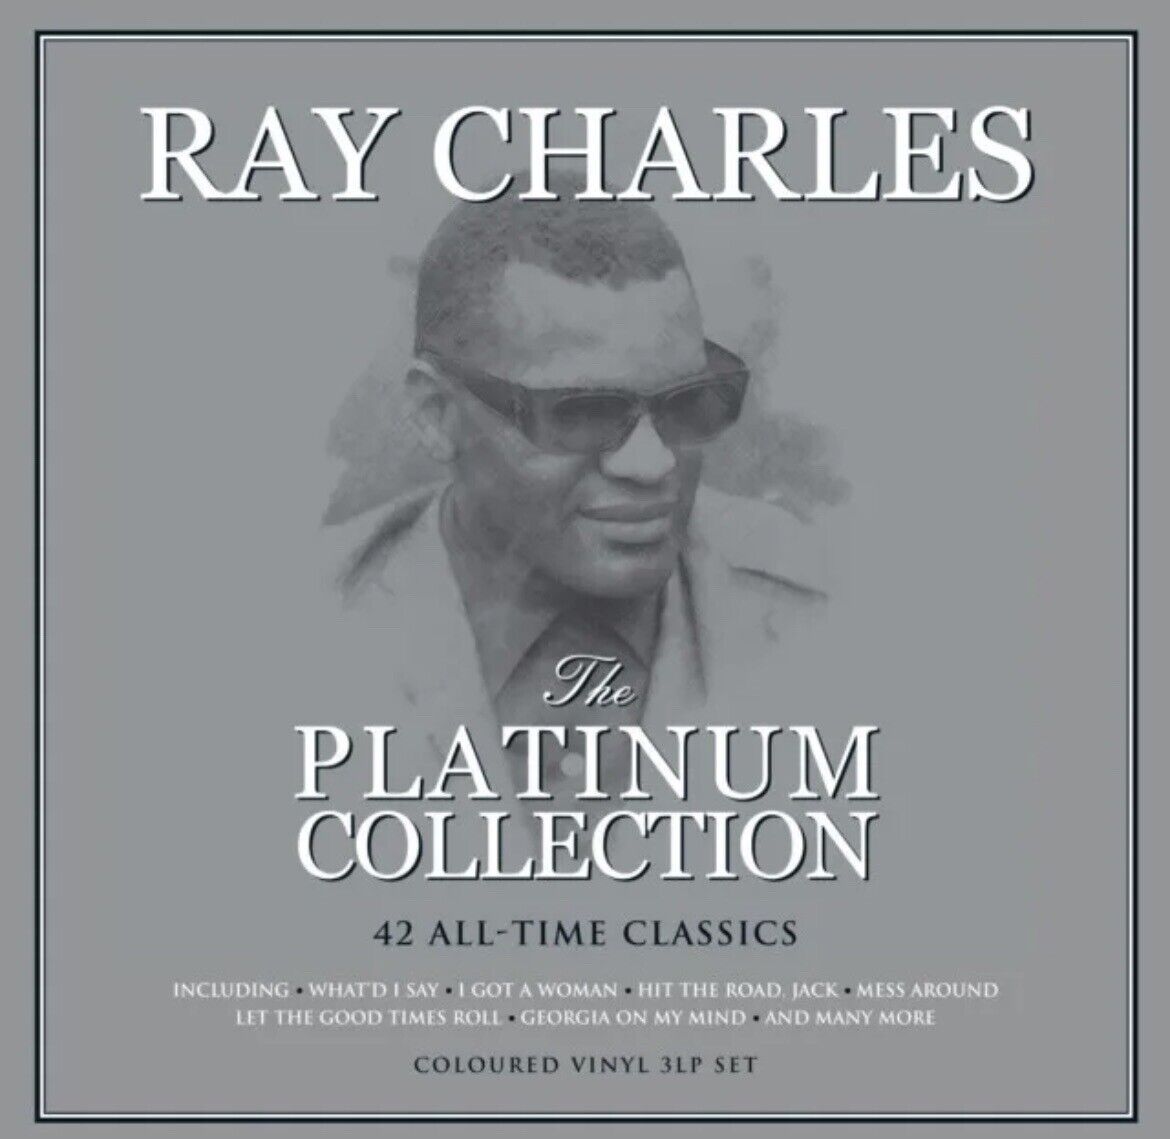 *NEW* RAY CHARLES - THE PLATINUM COLLECTION (3 LP WHITE VINYL, 2019) SEALED!!